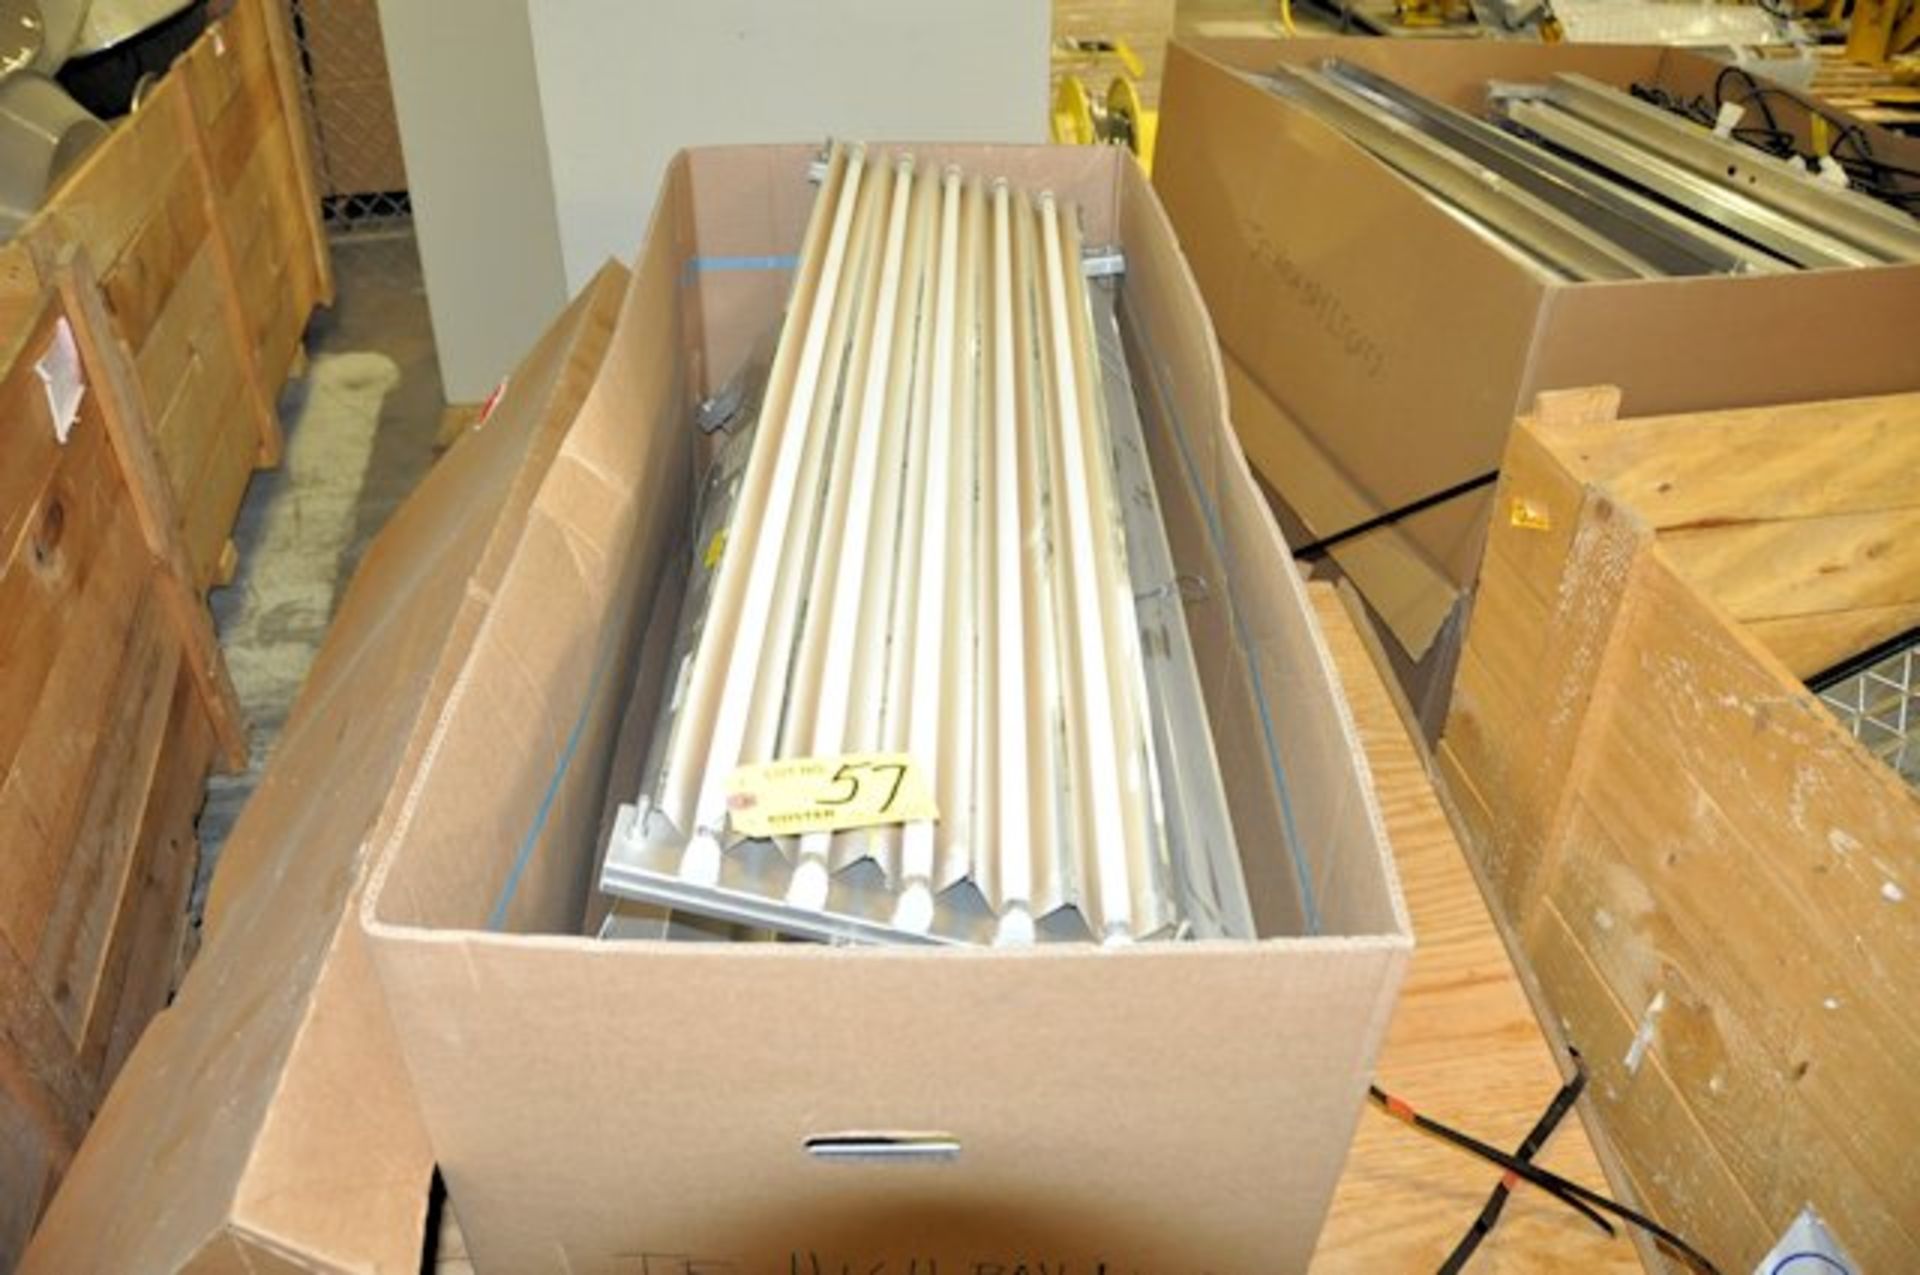 LOT OF T5 HIGH BAY FLUORESCENT LIGHT FIXTURES ON [1] PALLET - Image 2 of 2